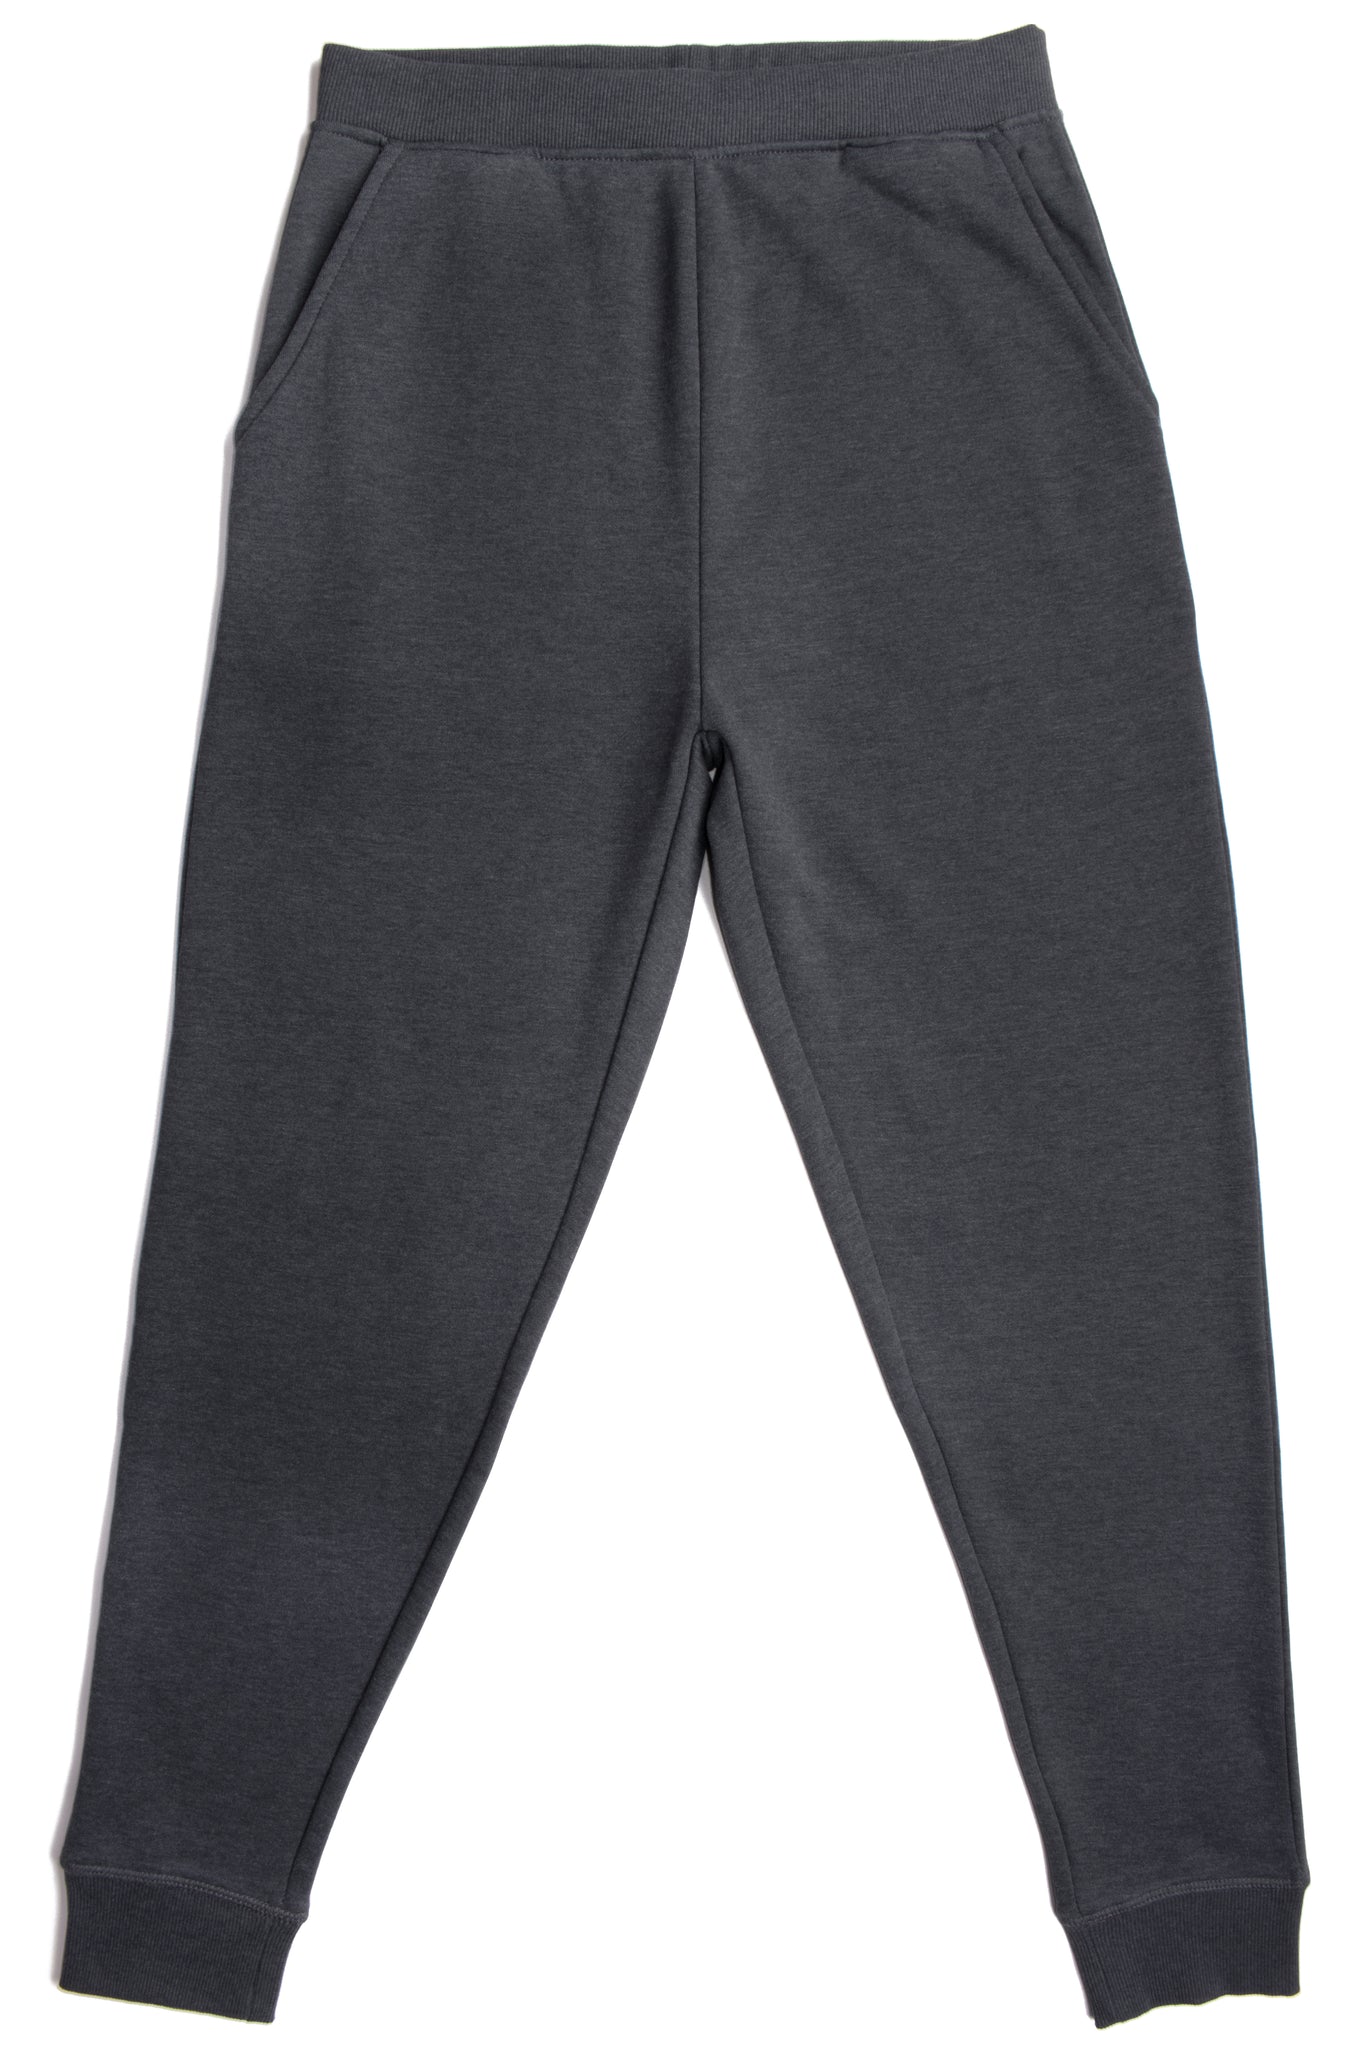 HERO-5020R Youth Joggers - Dark Heather (Relaxed Fit)